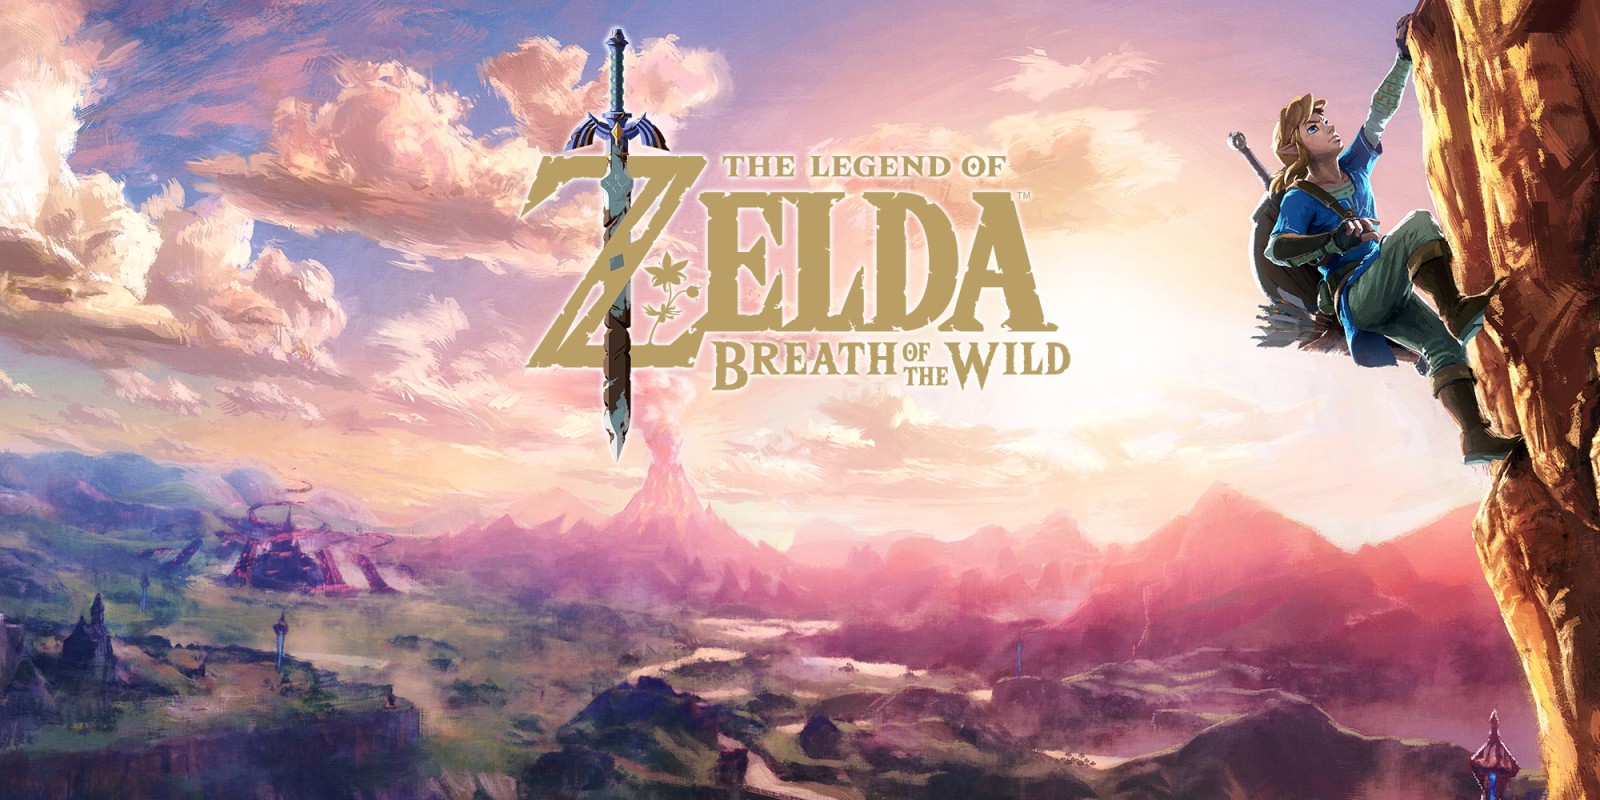 The Legend Of Zelda Breath Of The Wild PC Download Game For Free